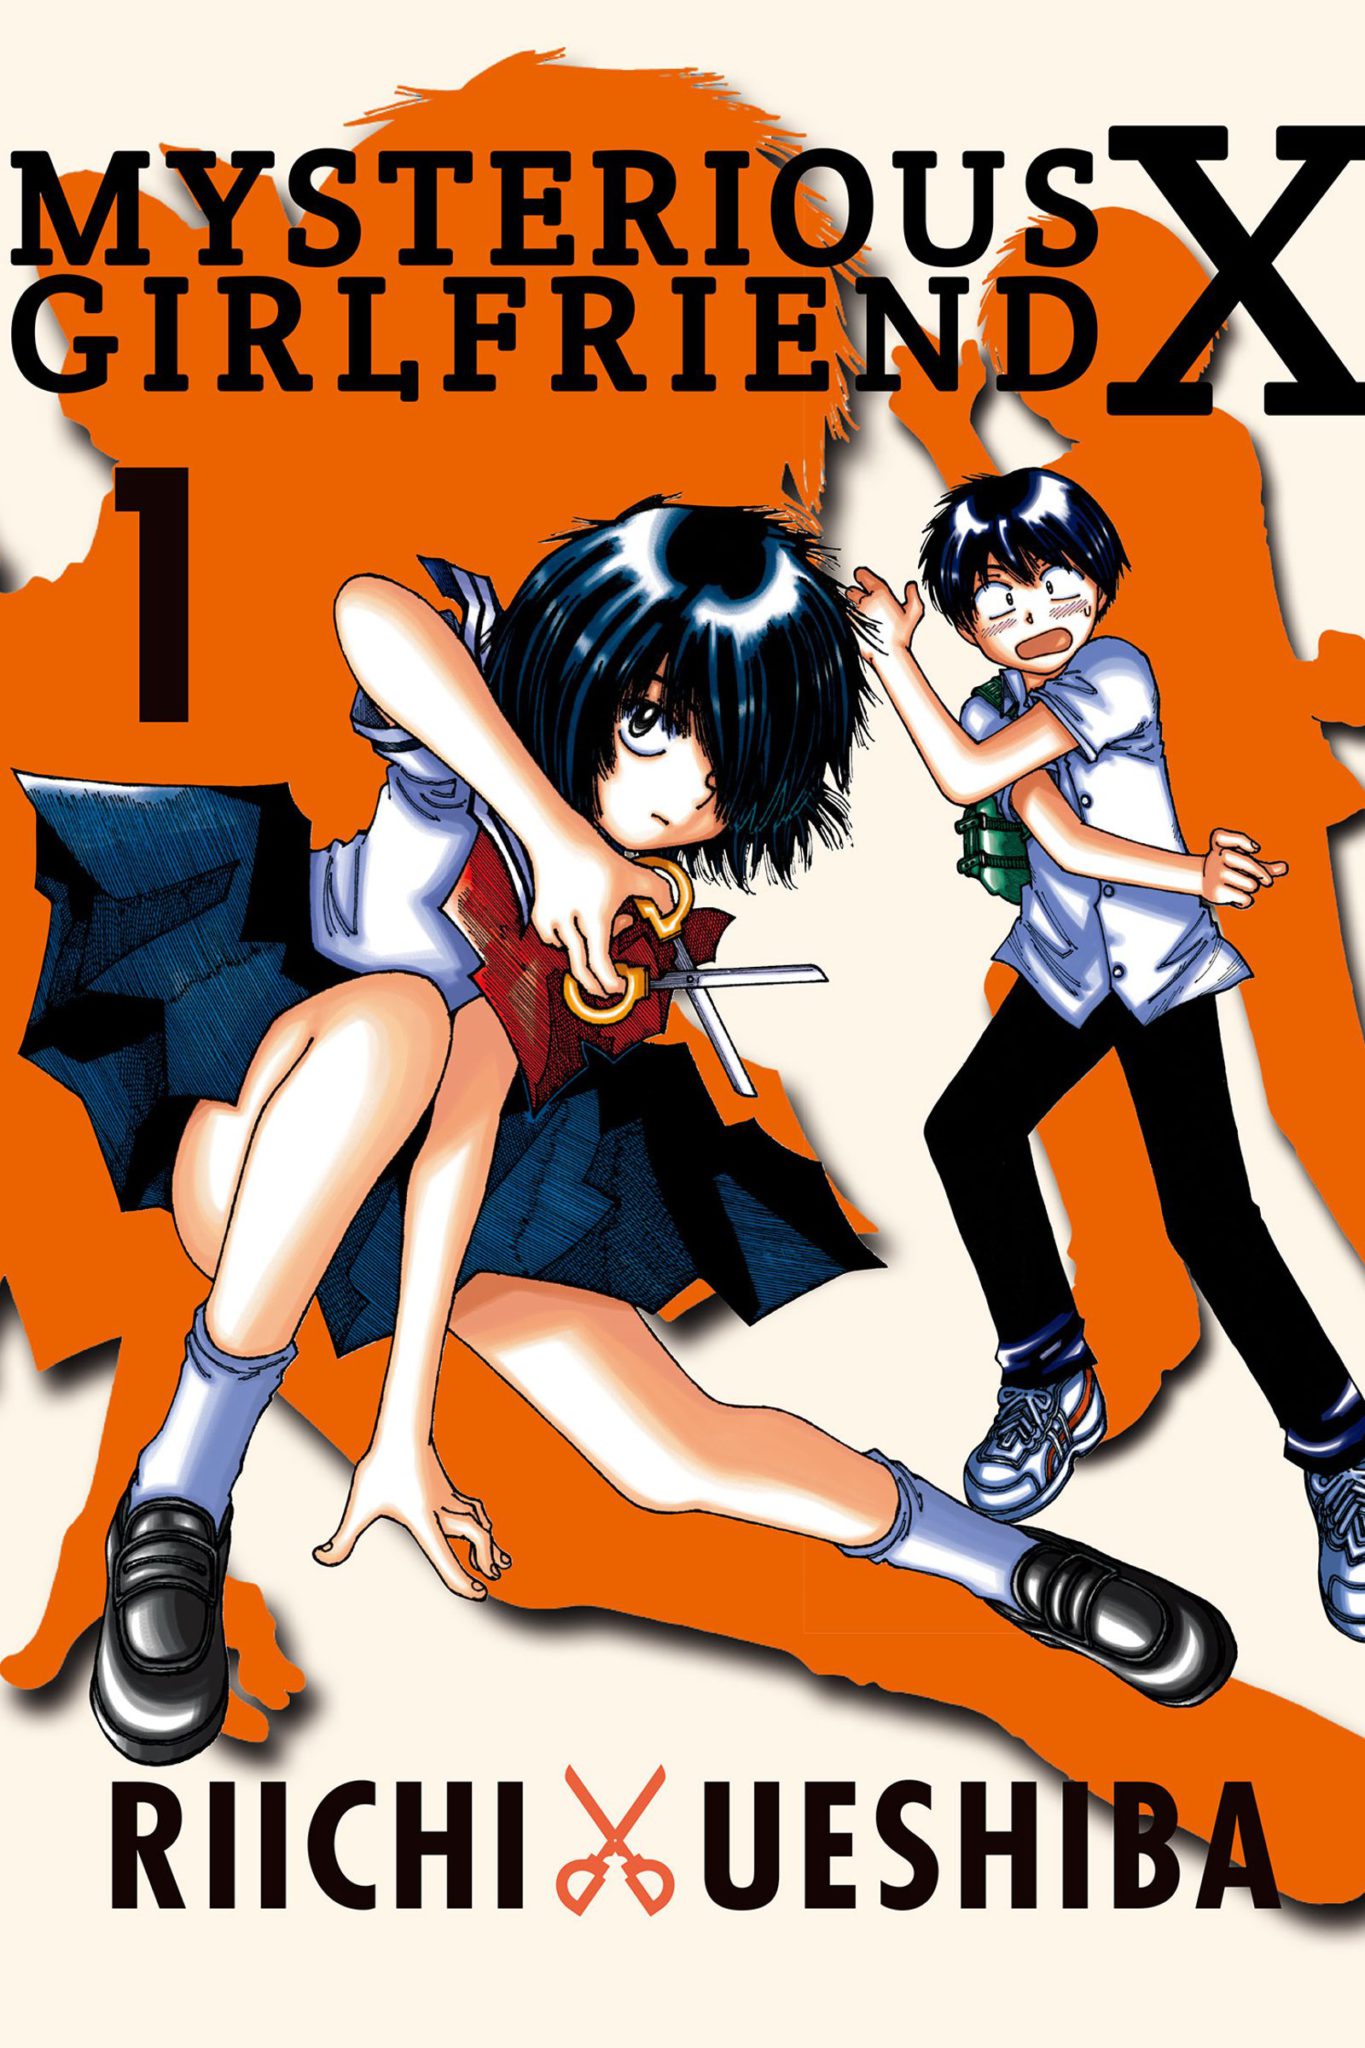 Mysterious Girlfriend X manga to end on chapter 92 – Capsule Computers